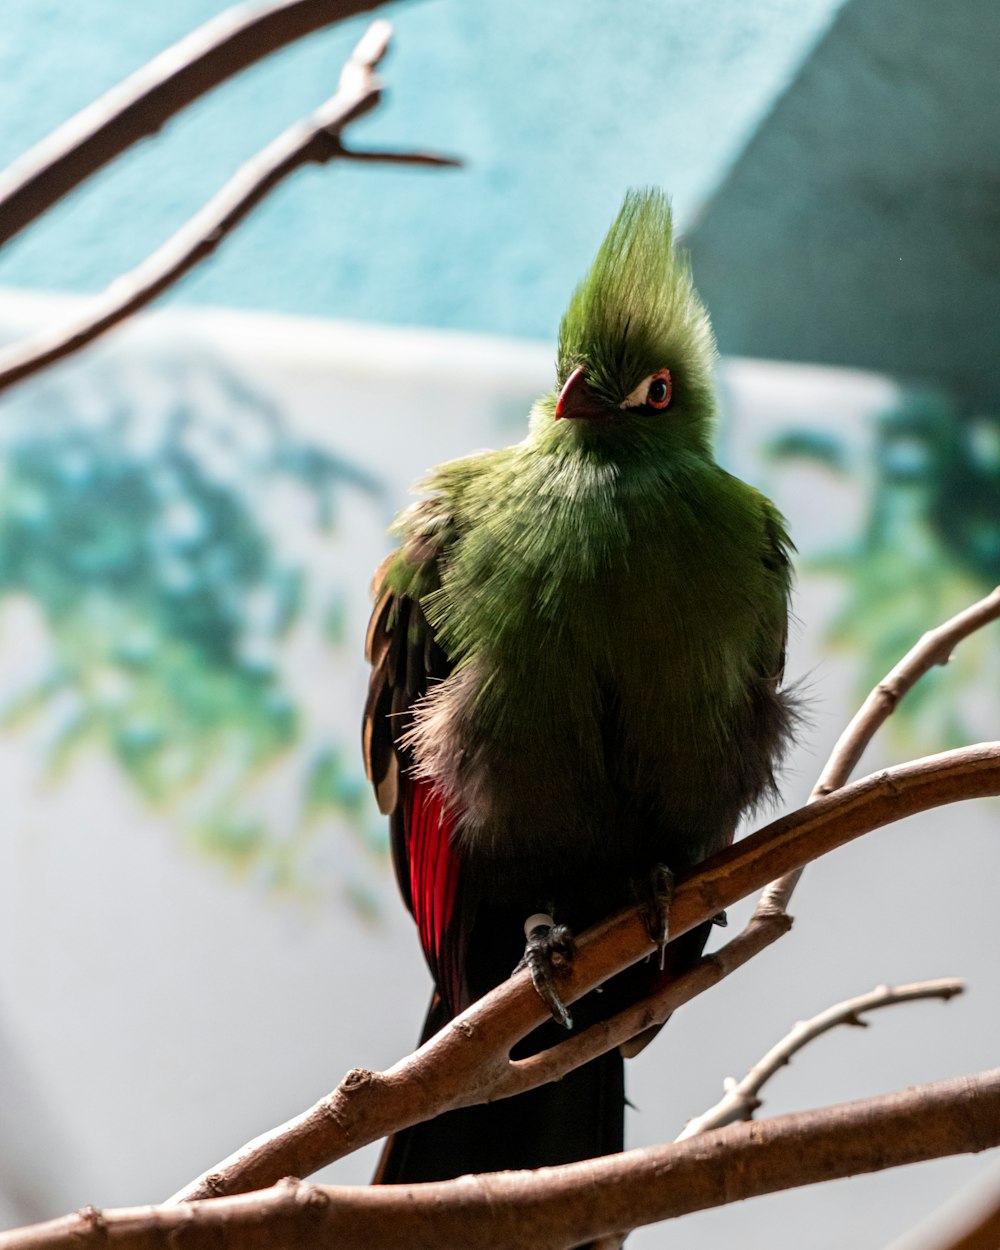 a bird with green feathers sitting on a tree branch